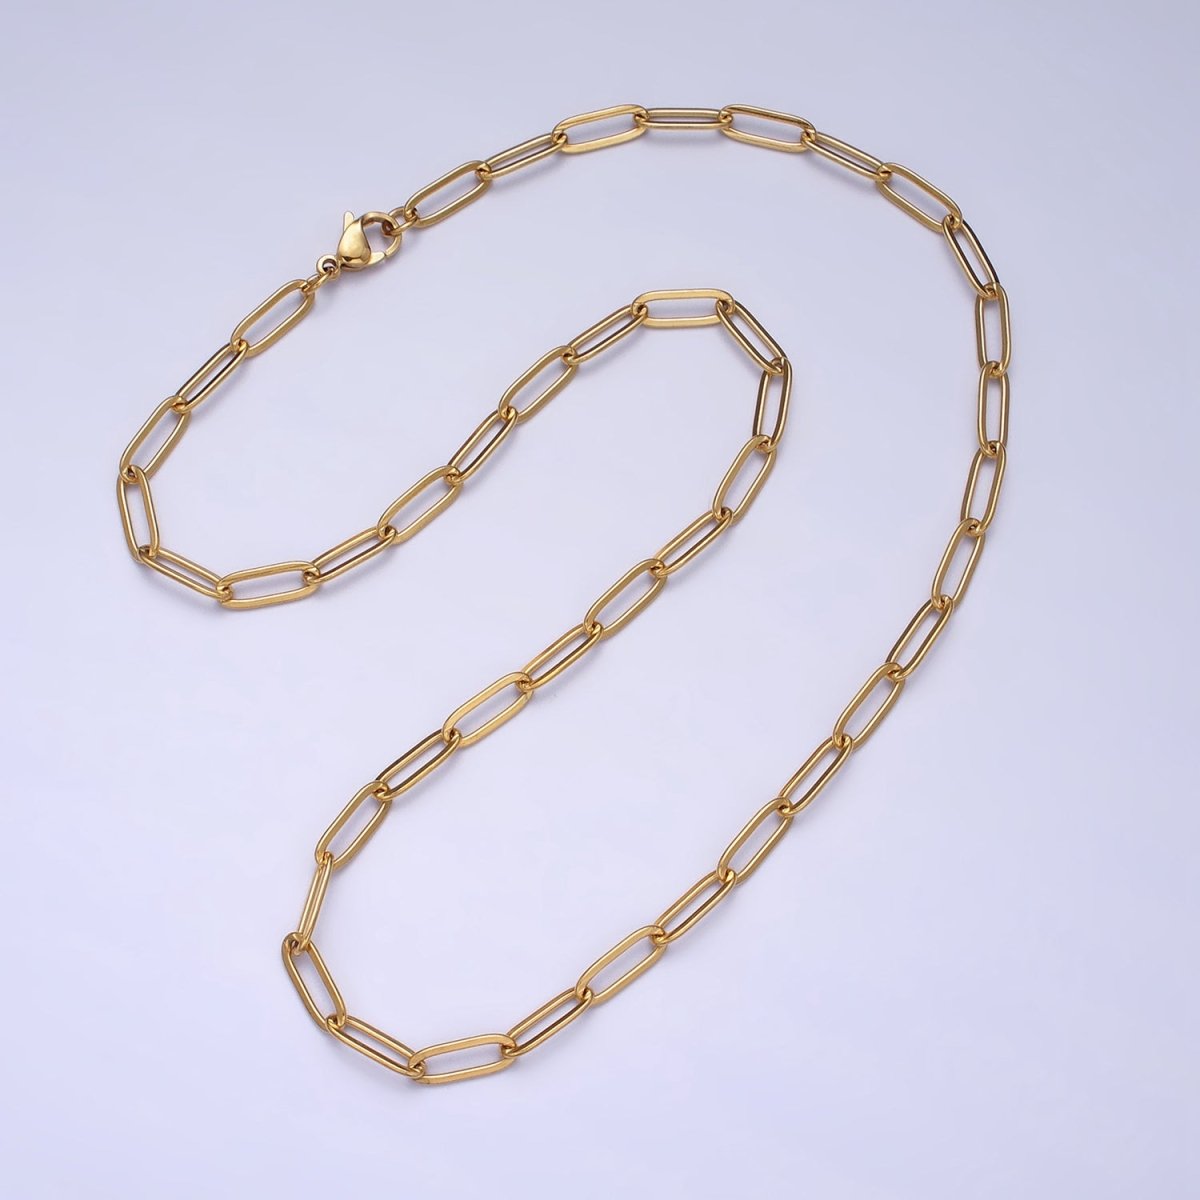 Dainty Gold Paperclip Link Chain Necklace Elongated Chain Necklace Stainless Steel Chain 17.7 inch Long | WA-1623 WA-1624 Clearance Pricing - DLUXCA